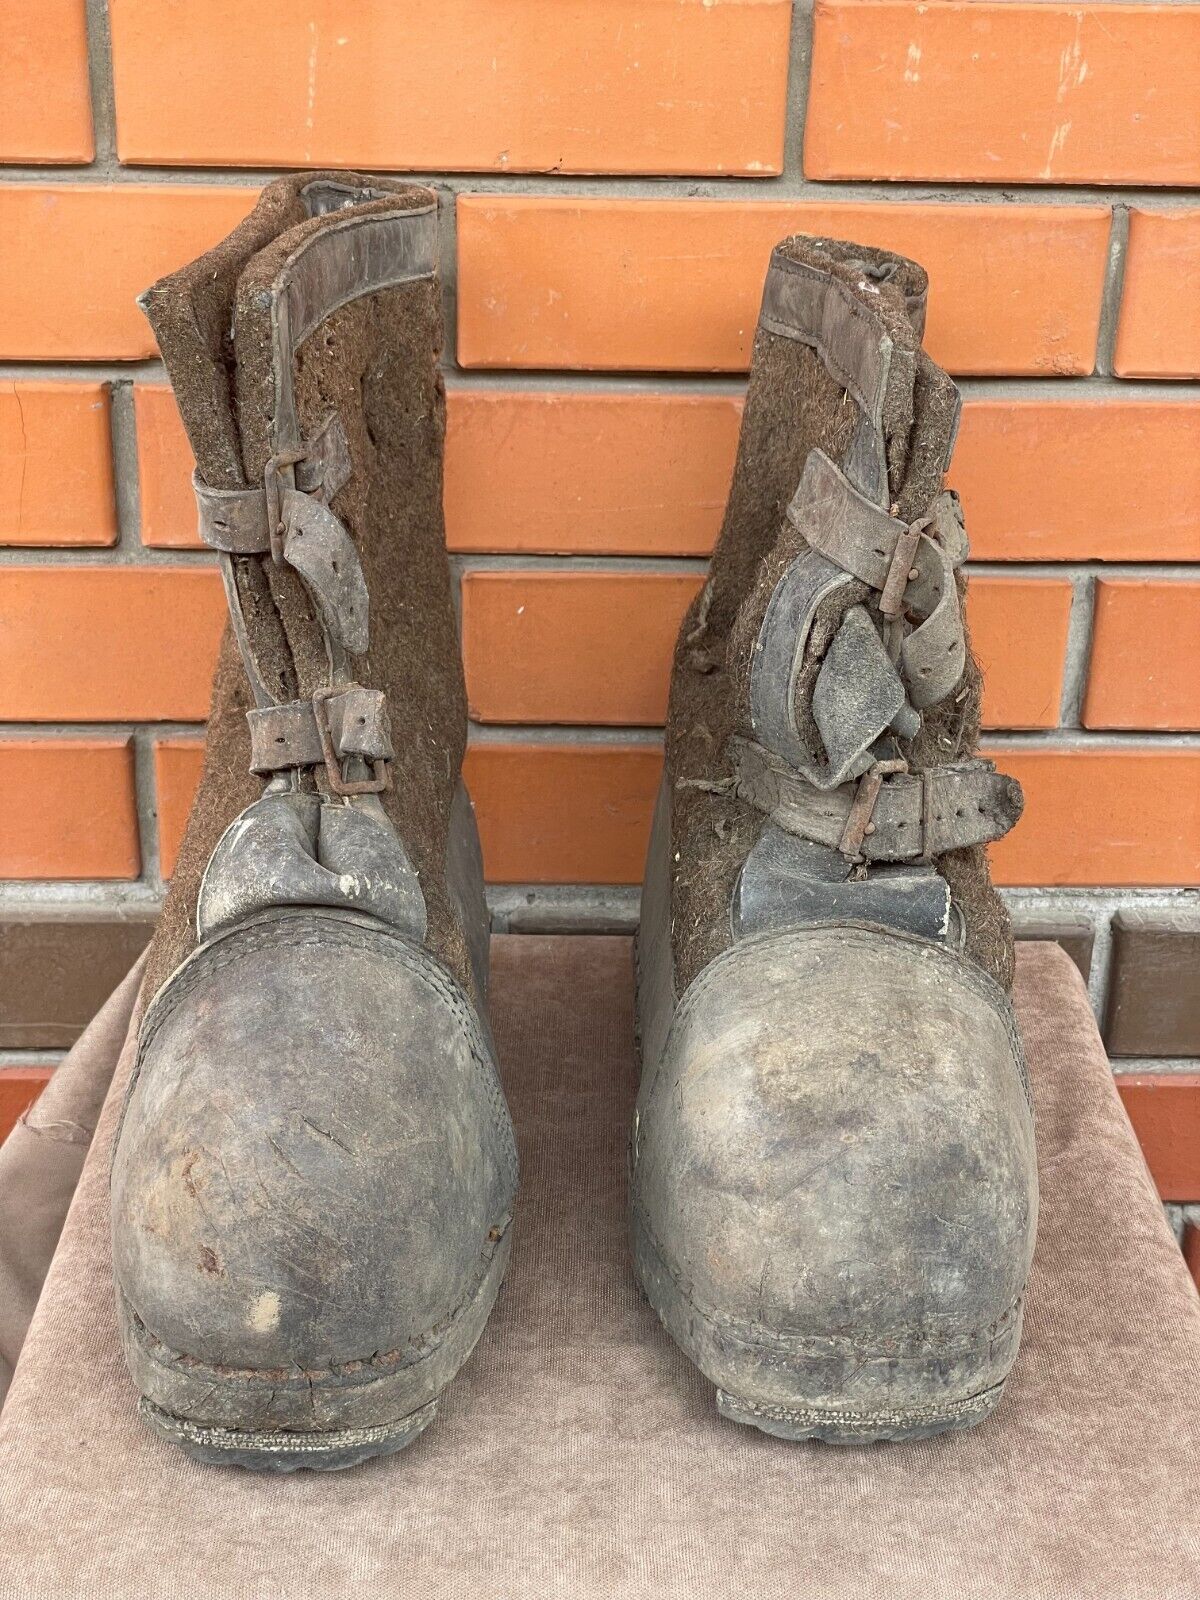 German winter boots for the guard on duty. Wehrmacht 1936-1945 WWII WW2